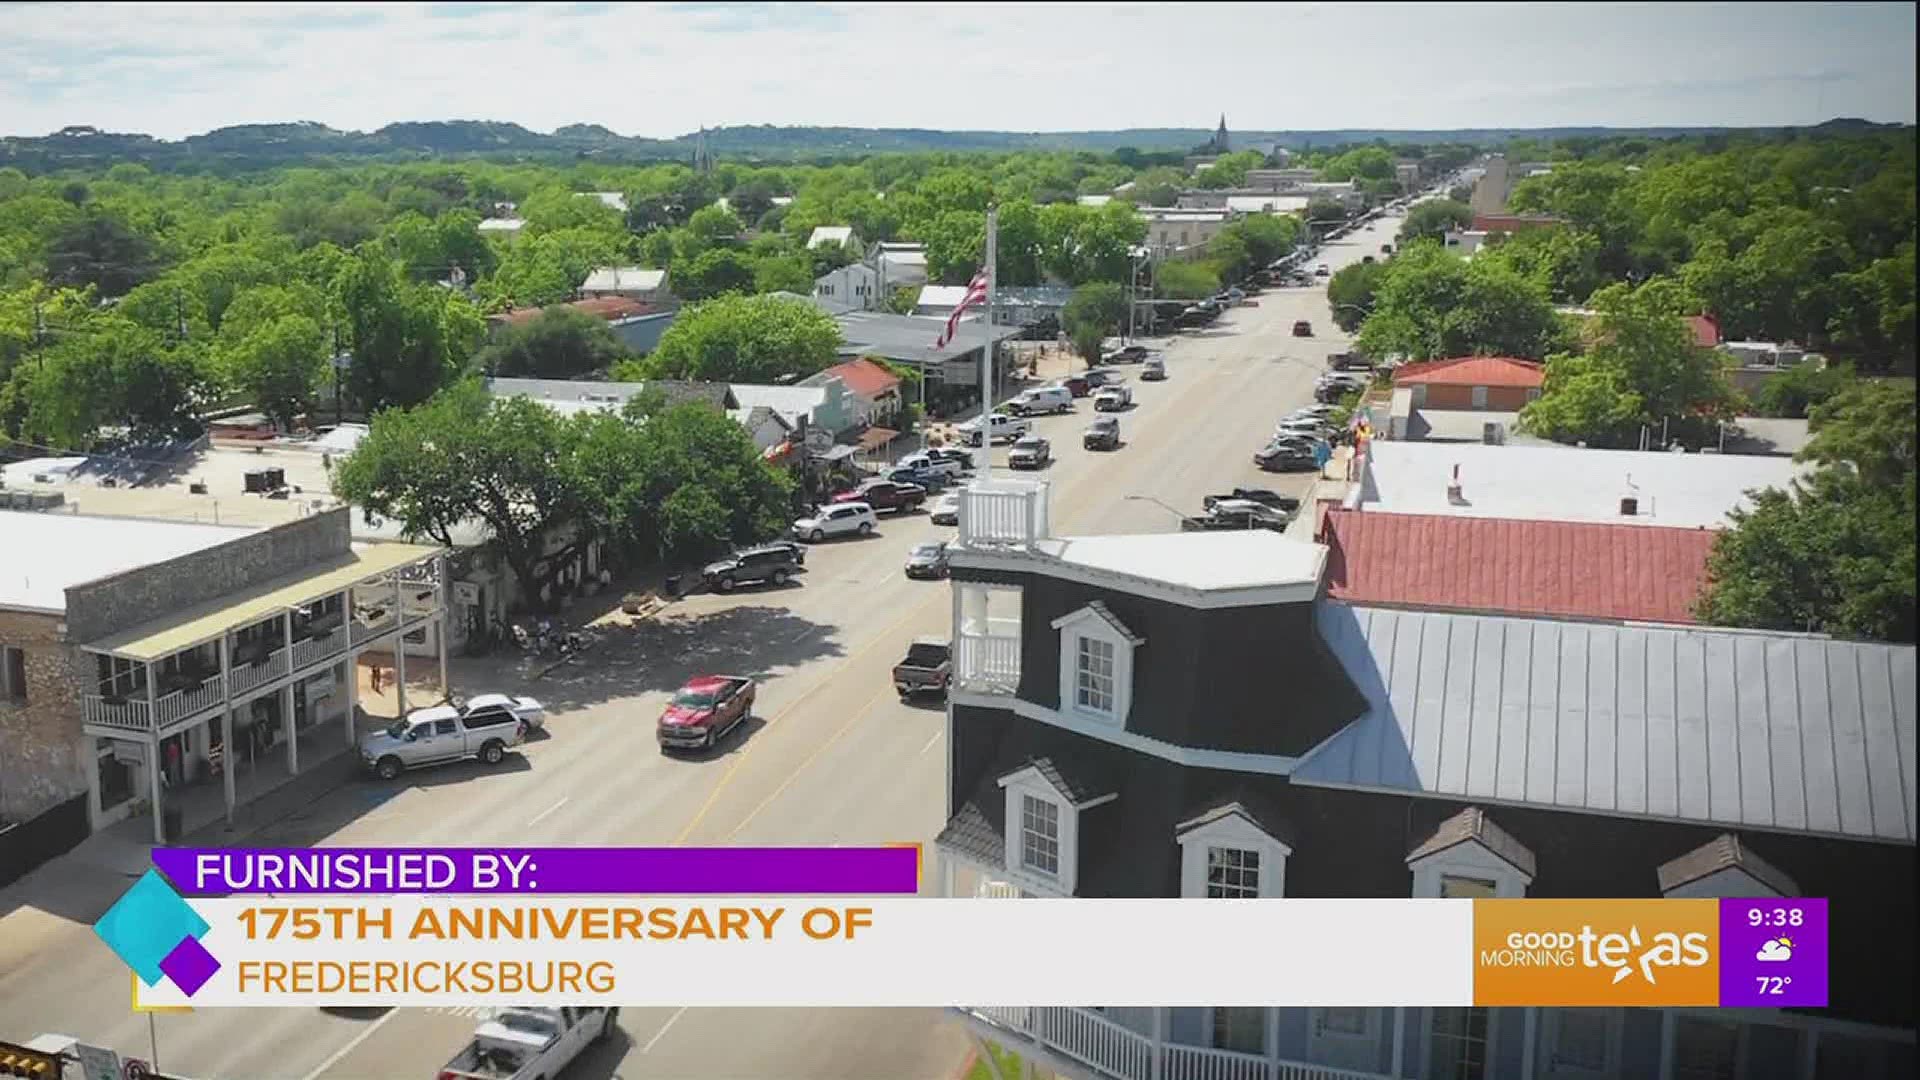 This segment is sponsored by: 175th Anniversary of Fredericksburg